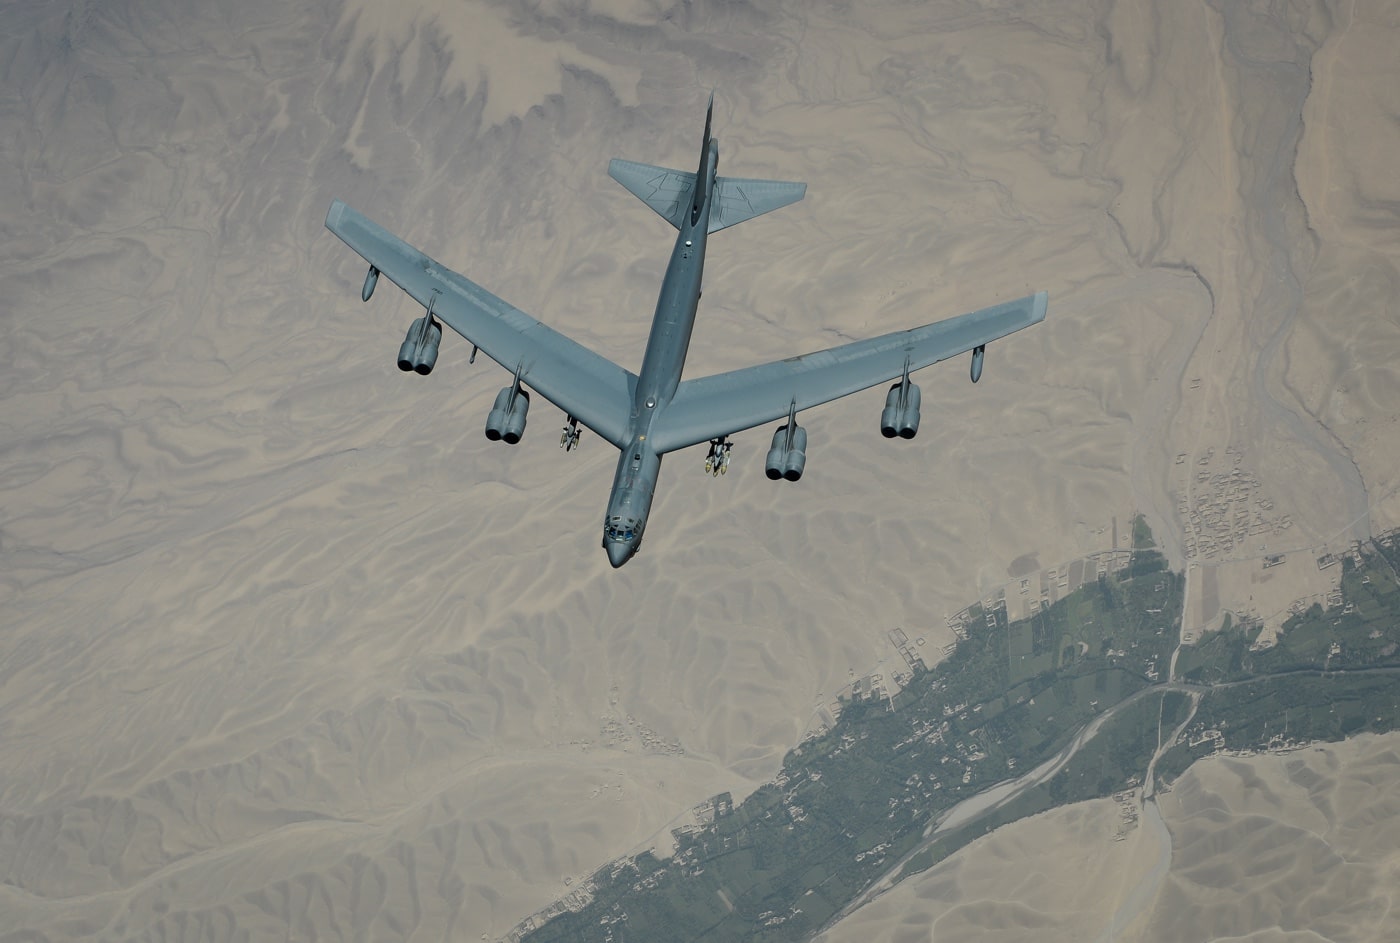 b-52 on a sw asia mission in 2017